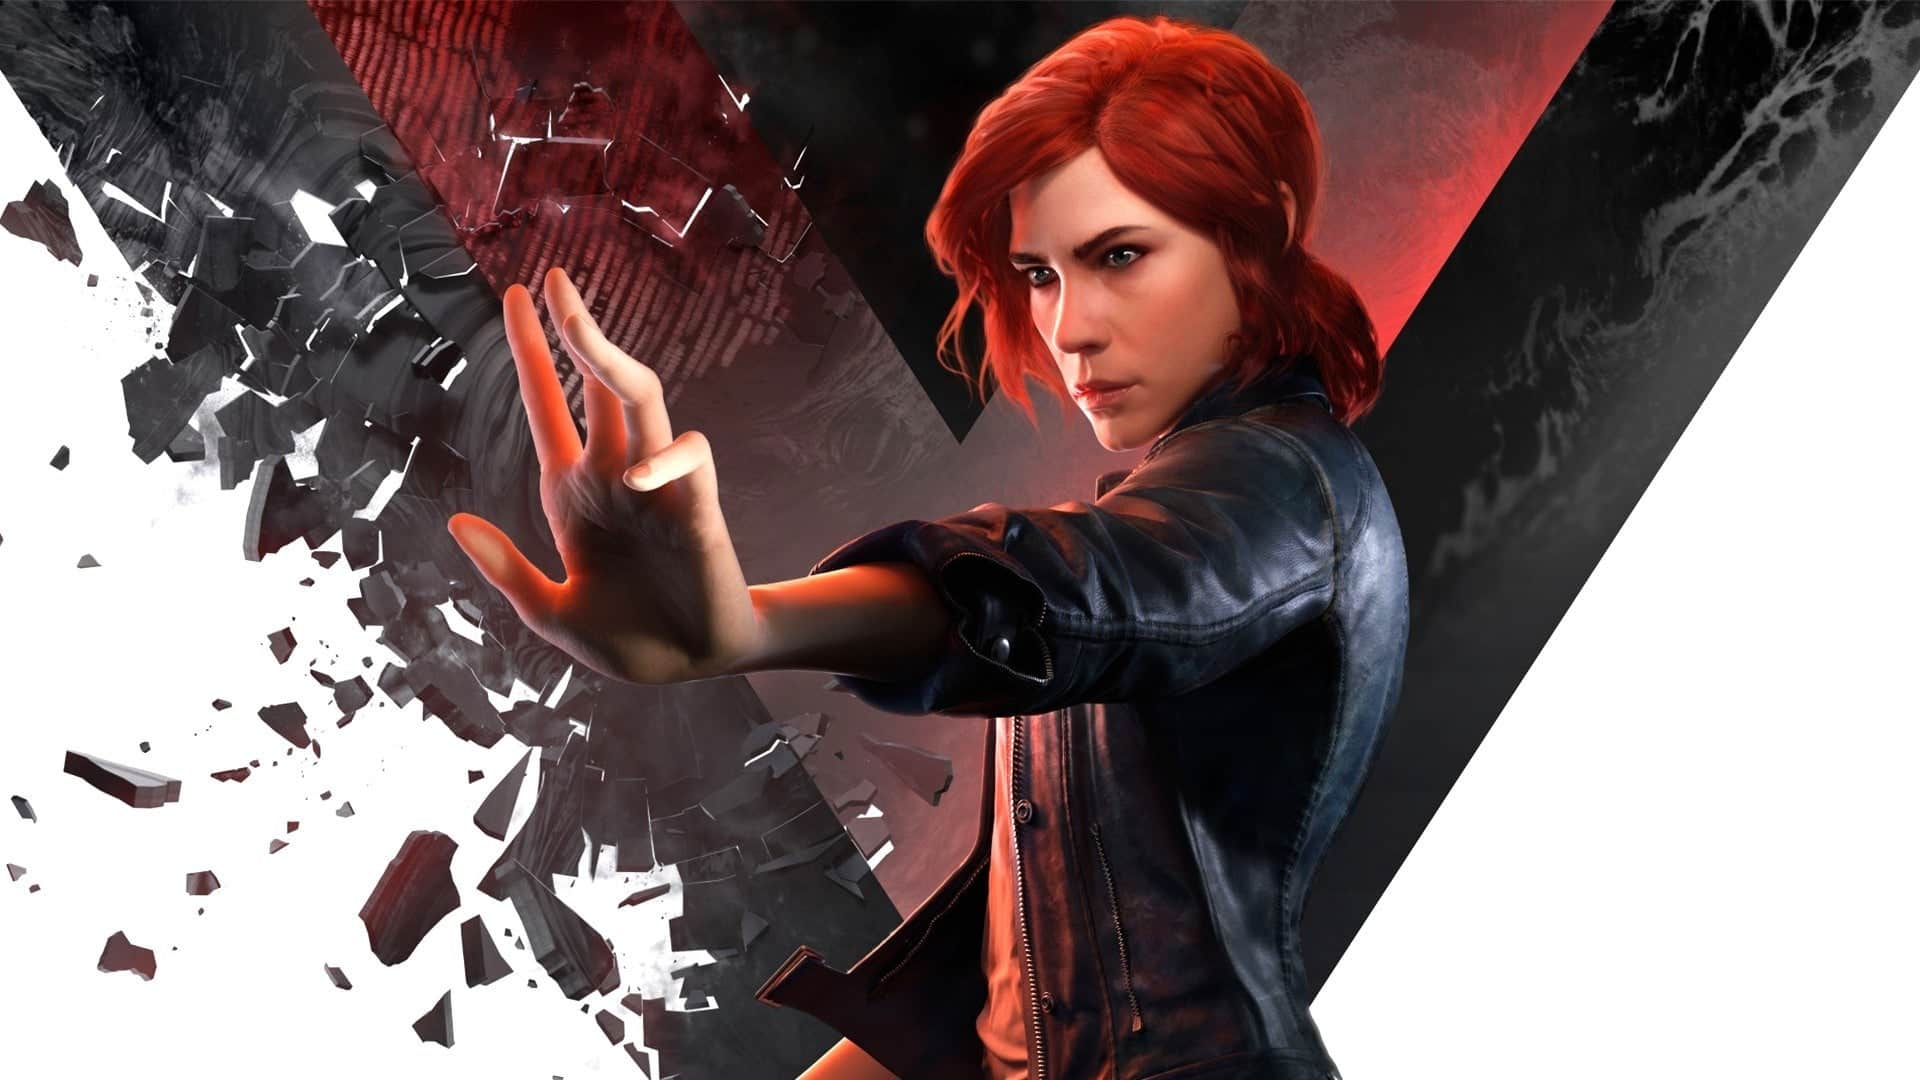 Remedy cancels multiplayer game Project Kestrel